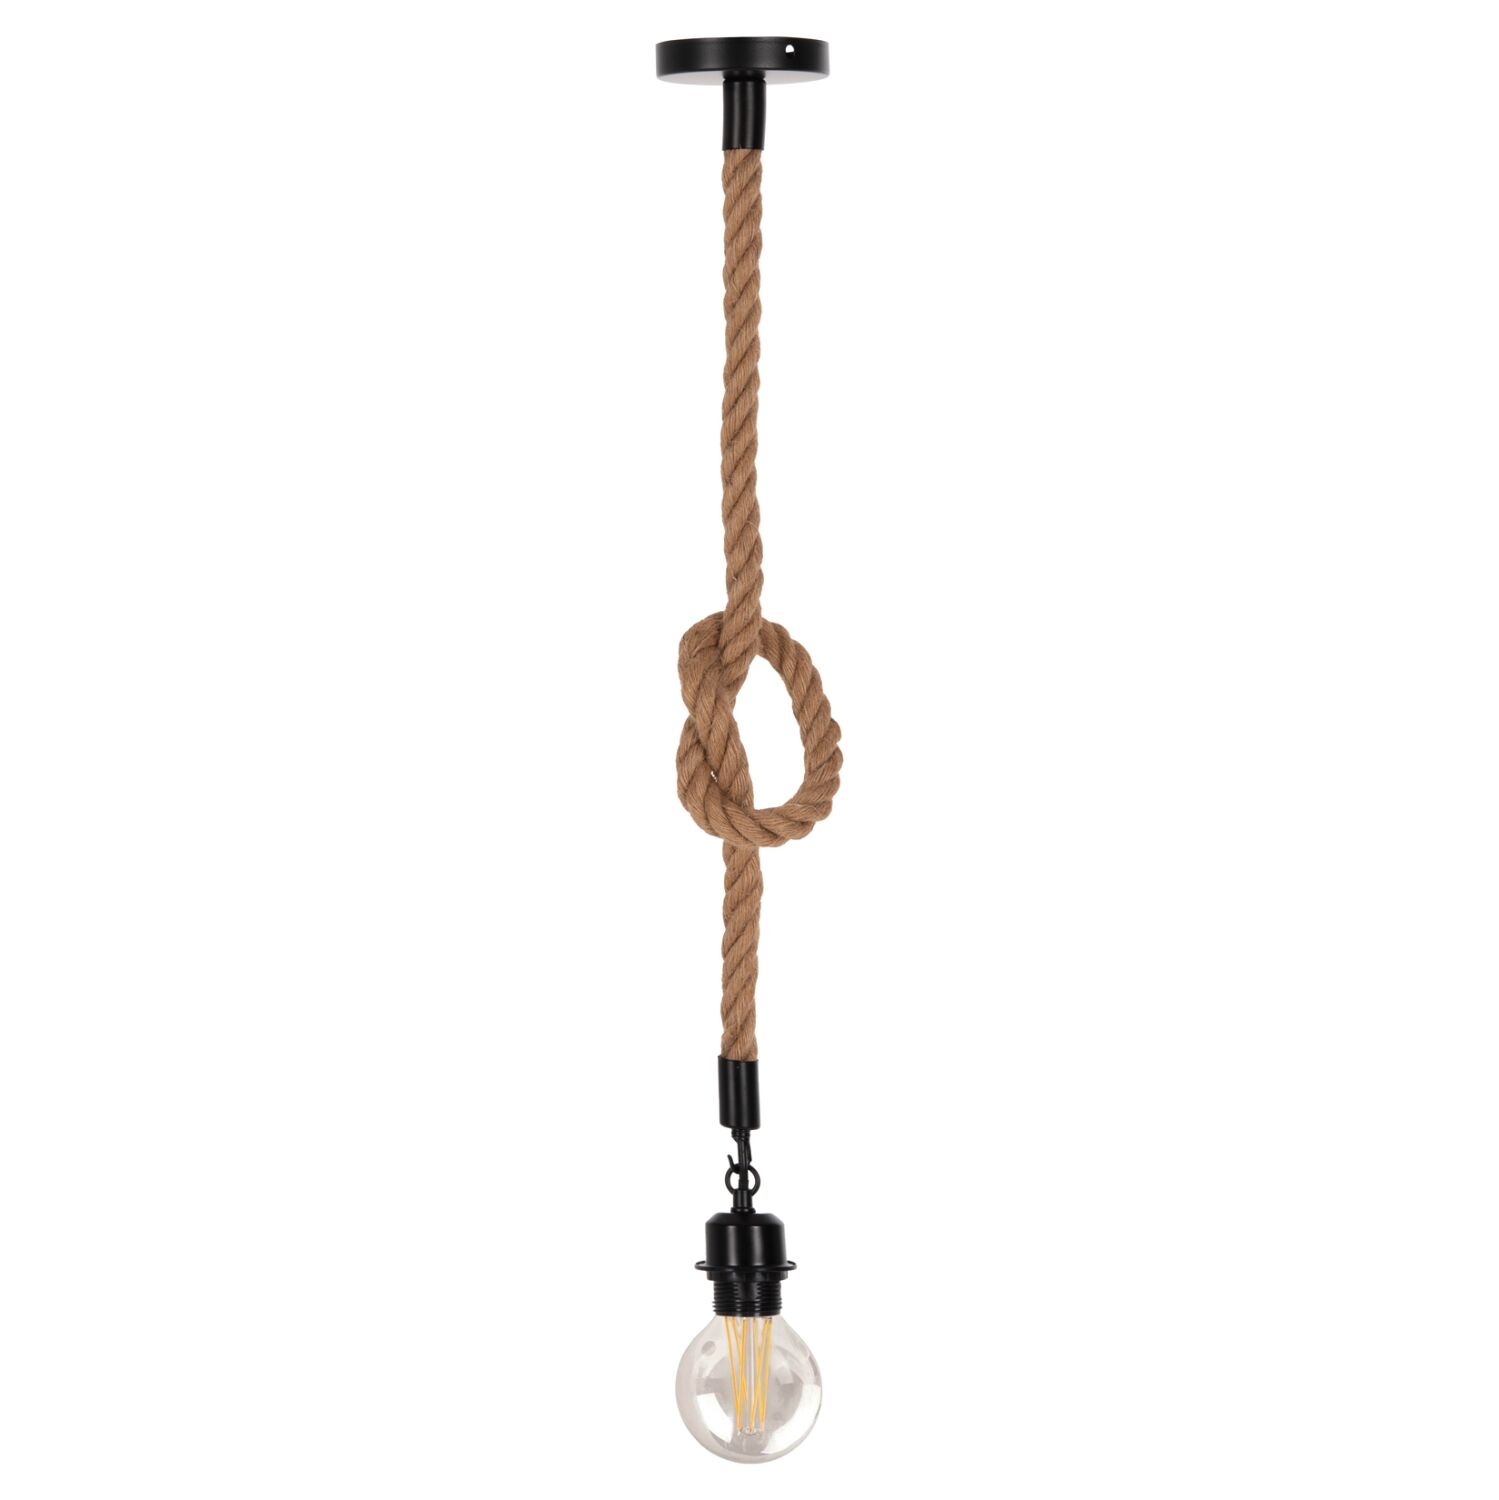 CEILING PENDANT LAMP HM4042 ROPE 1M LONG AND 1.6cm THICK-E27 SOCKET